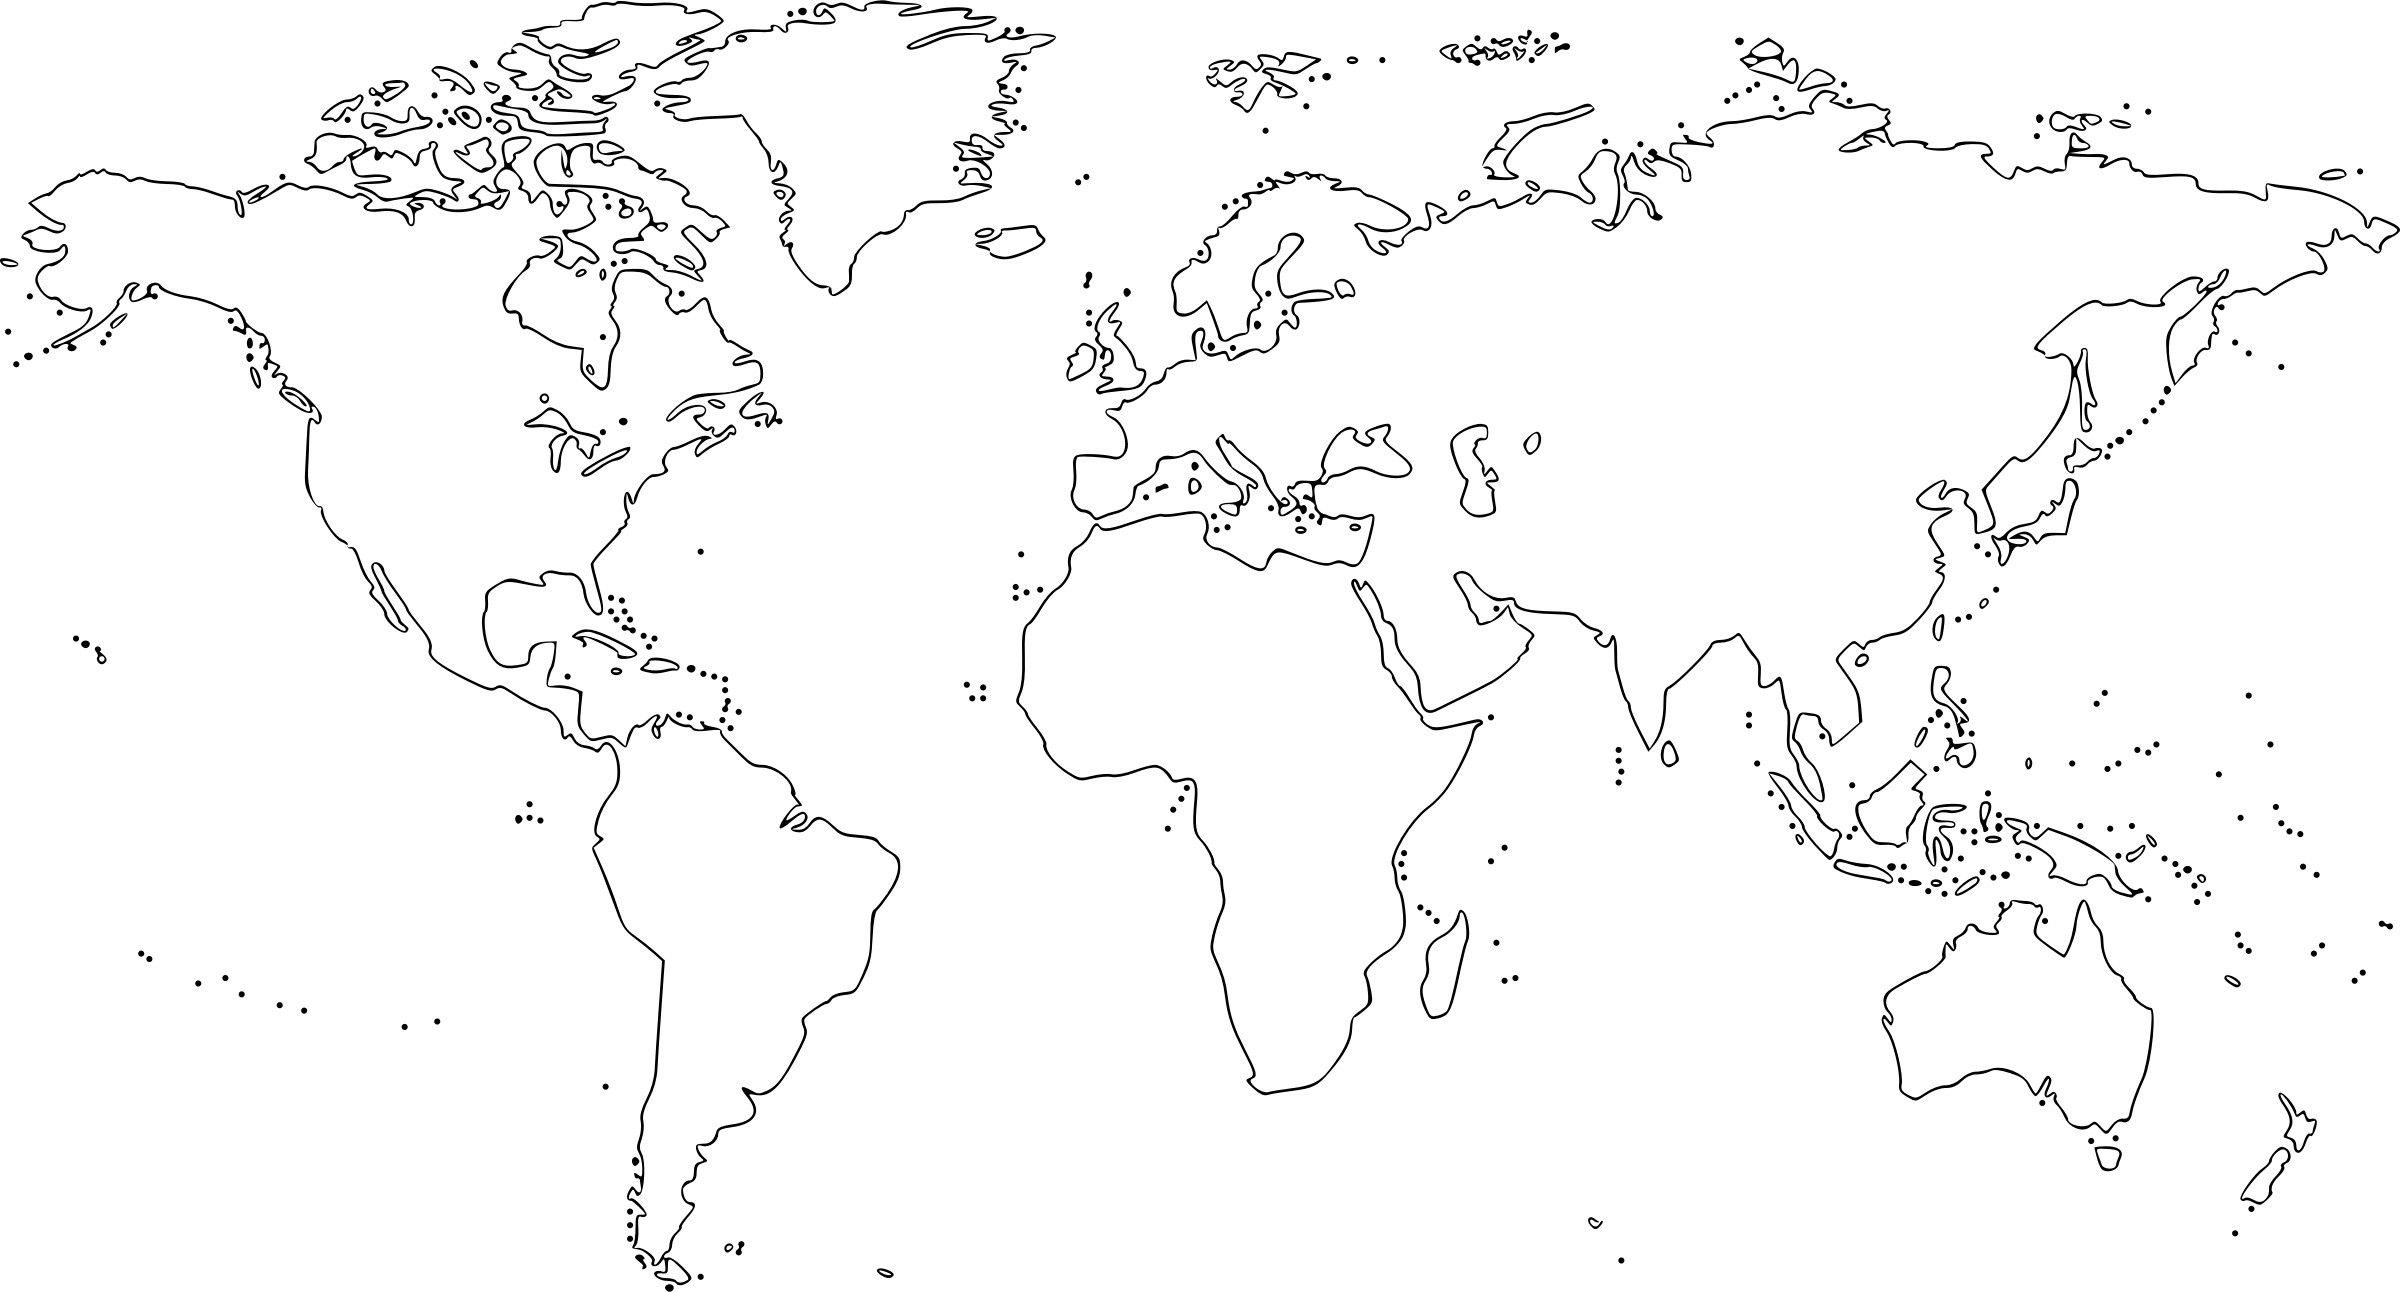 Coloring Pages : World Map Coloring Page With Countries Printable - Coloring World Map Printable